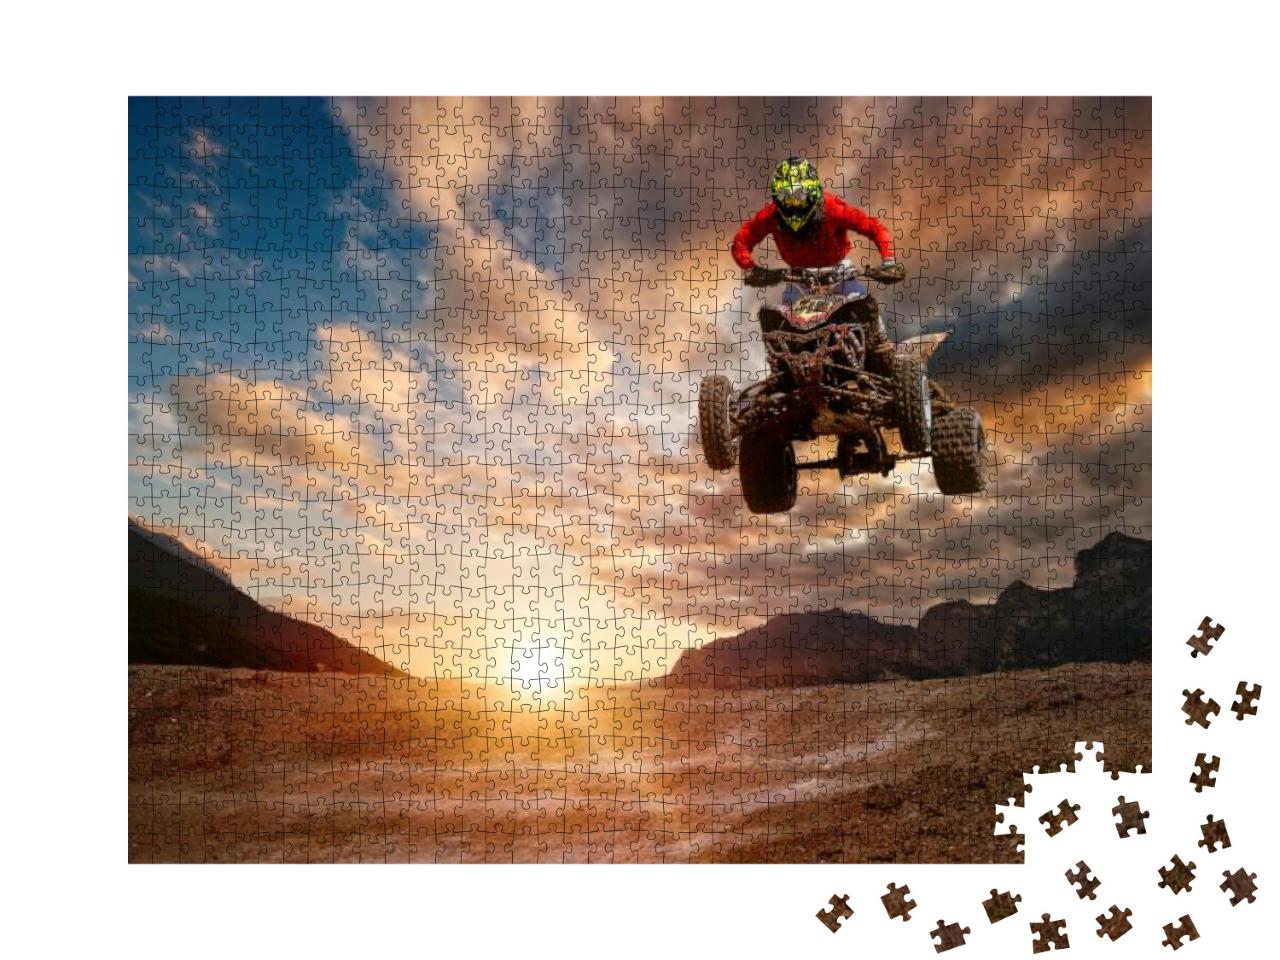 Man on At Jump on the Trail During Sunset... Jigsaw Puzzle with 1000 pieces